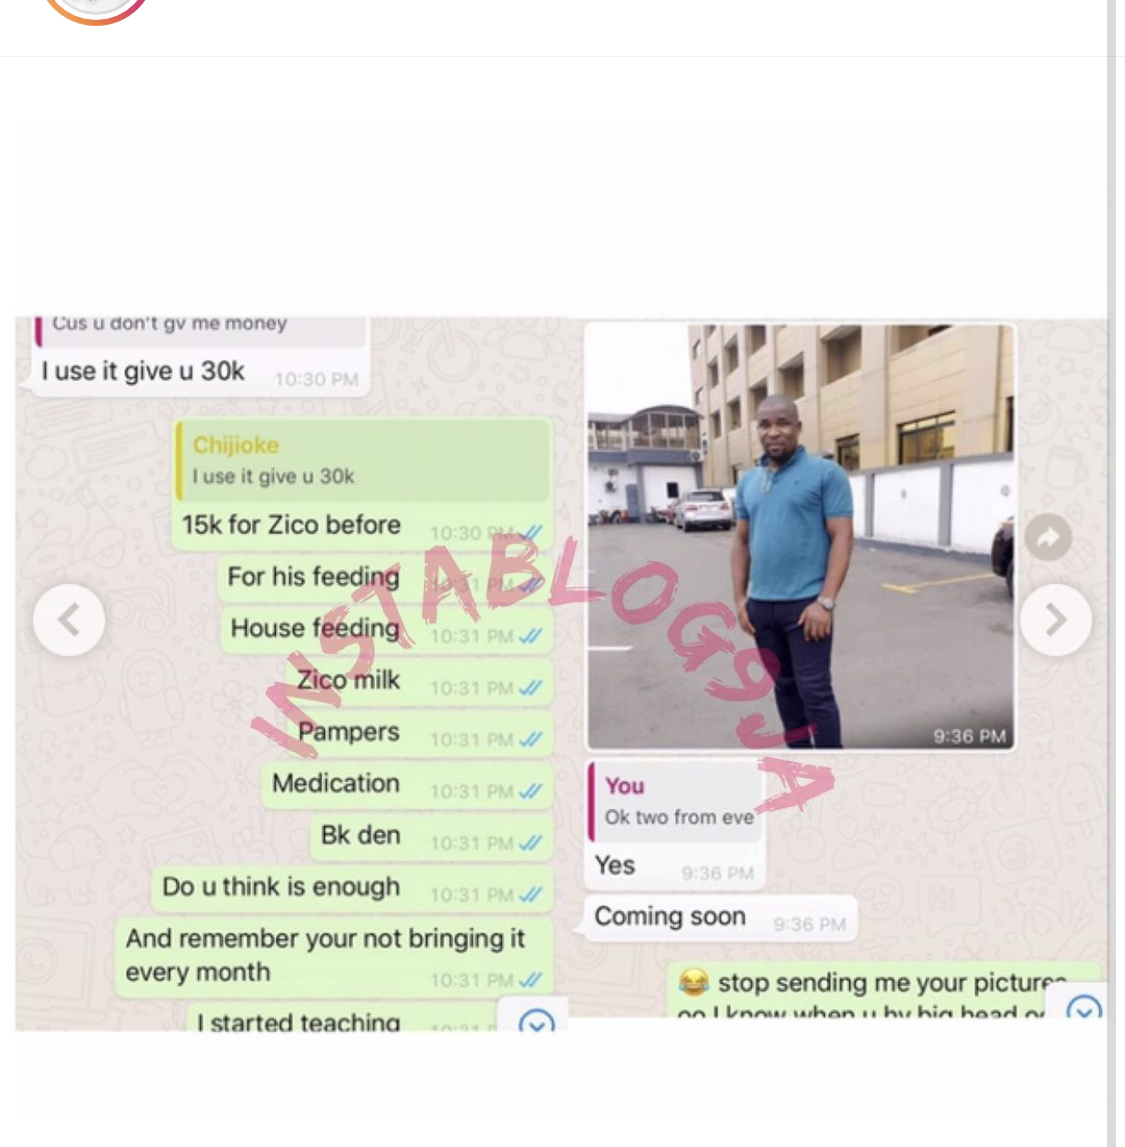 Screenshots of the chat between movie producer and his ex-wife